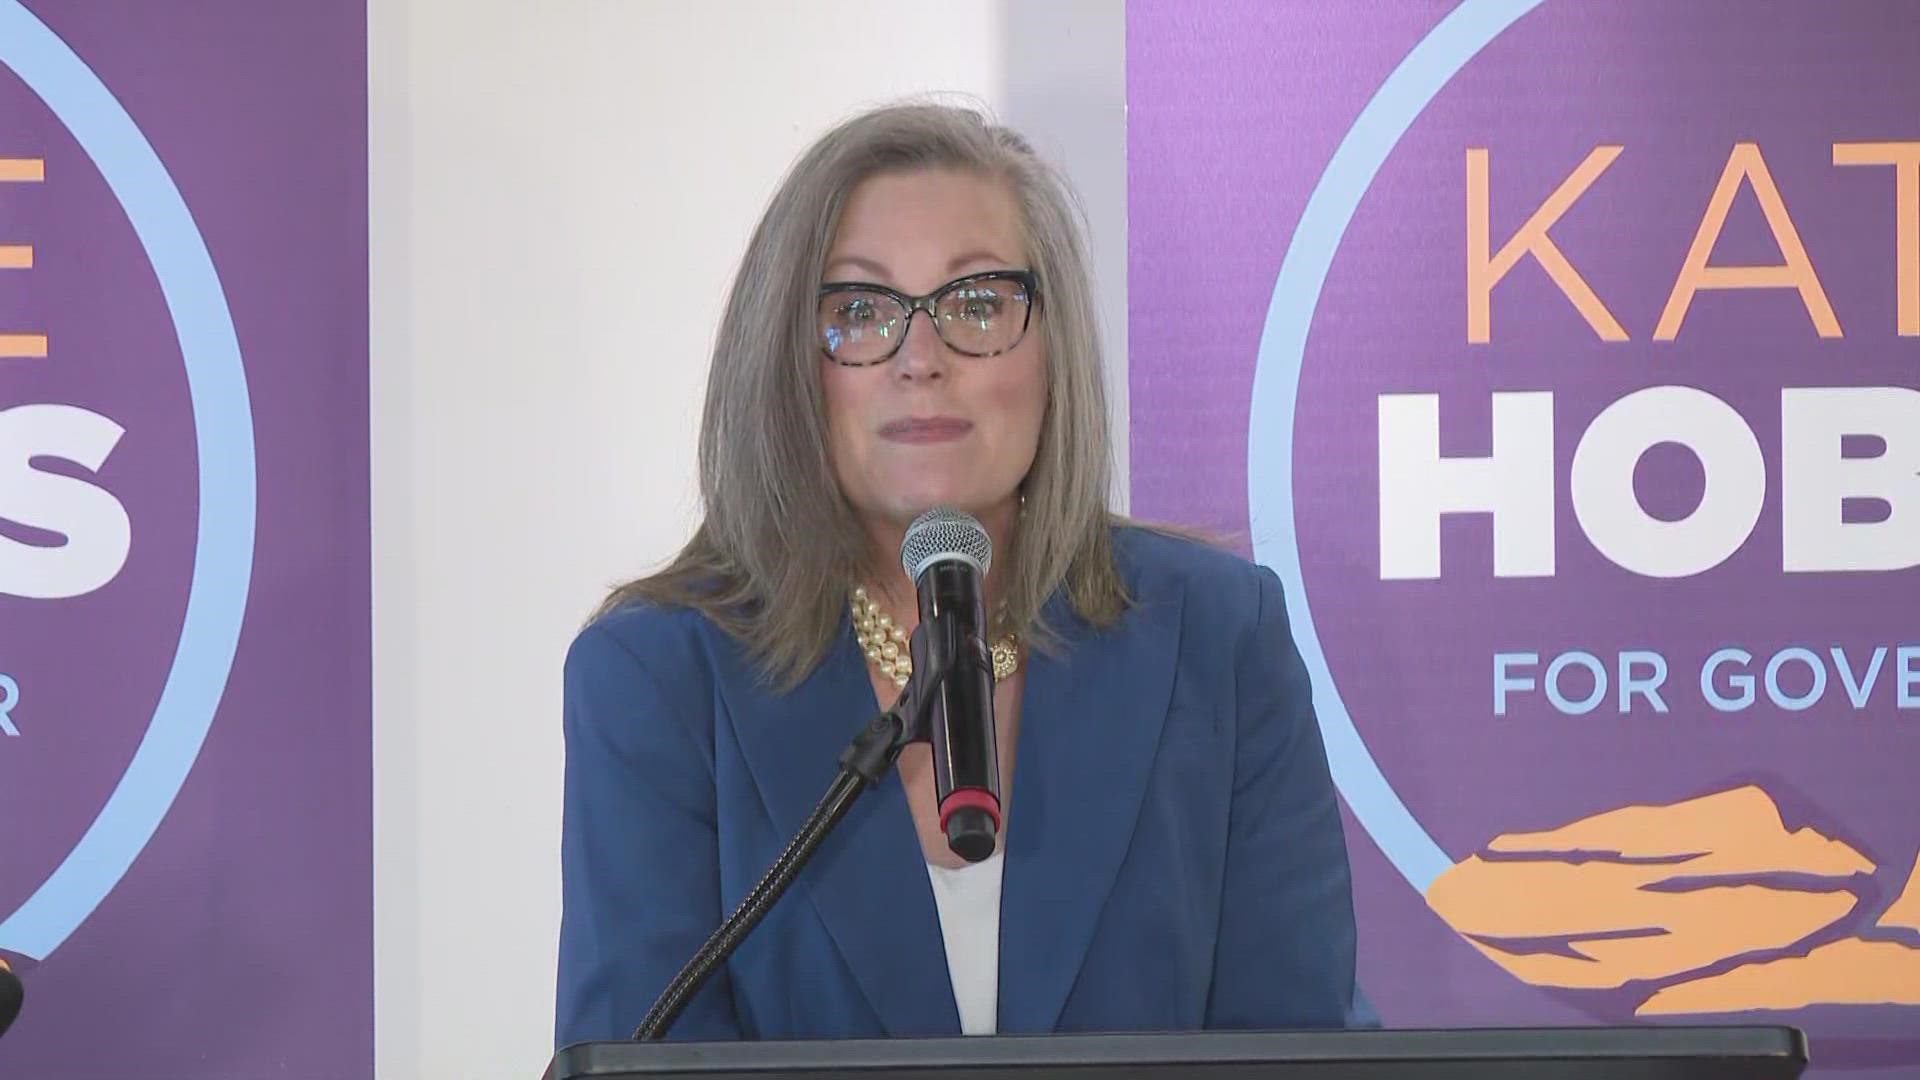 Hobbs addressed rising costs, abortion, border crisis, water crisis, school funding in her speech and said it would take both parties working together to fix them.